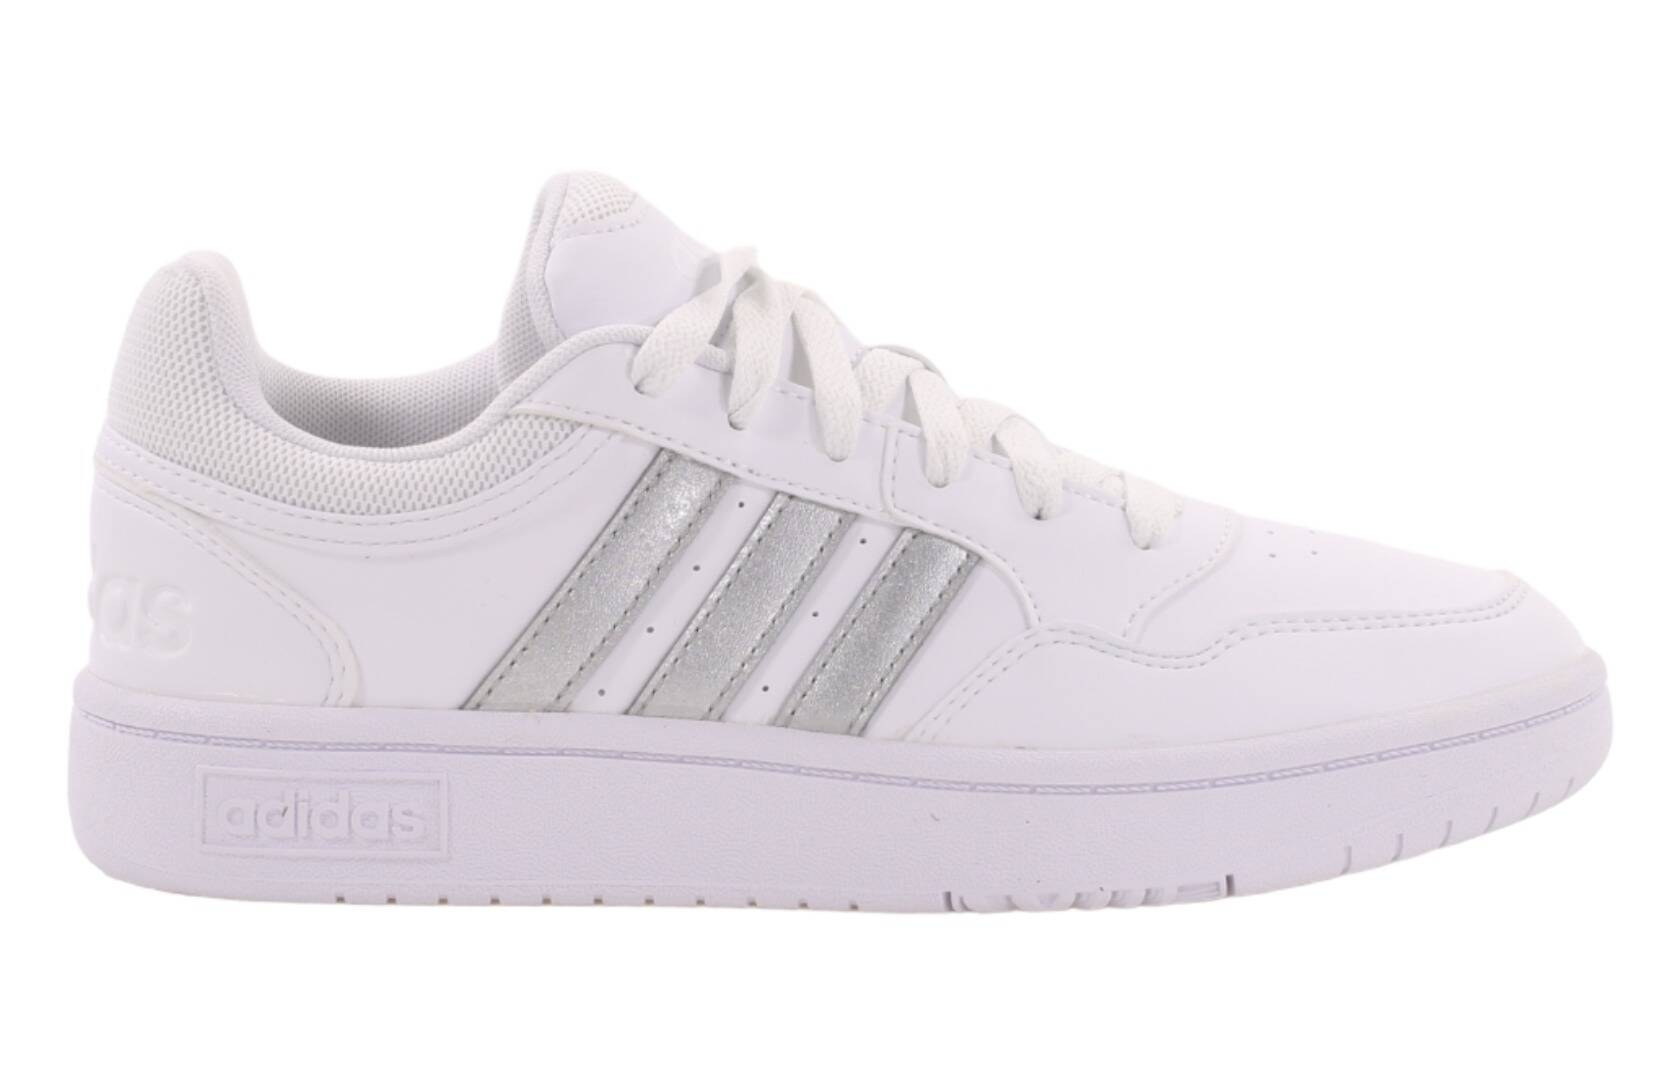 adidas HOOPS 3.0 GY1912 women's shoes